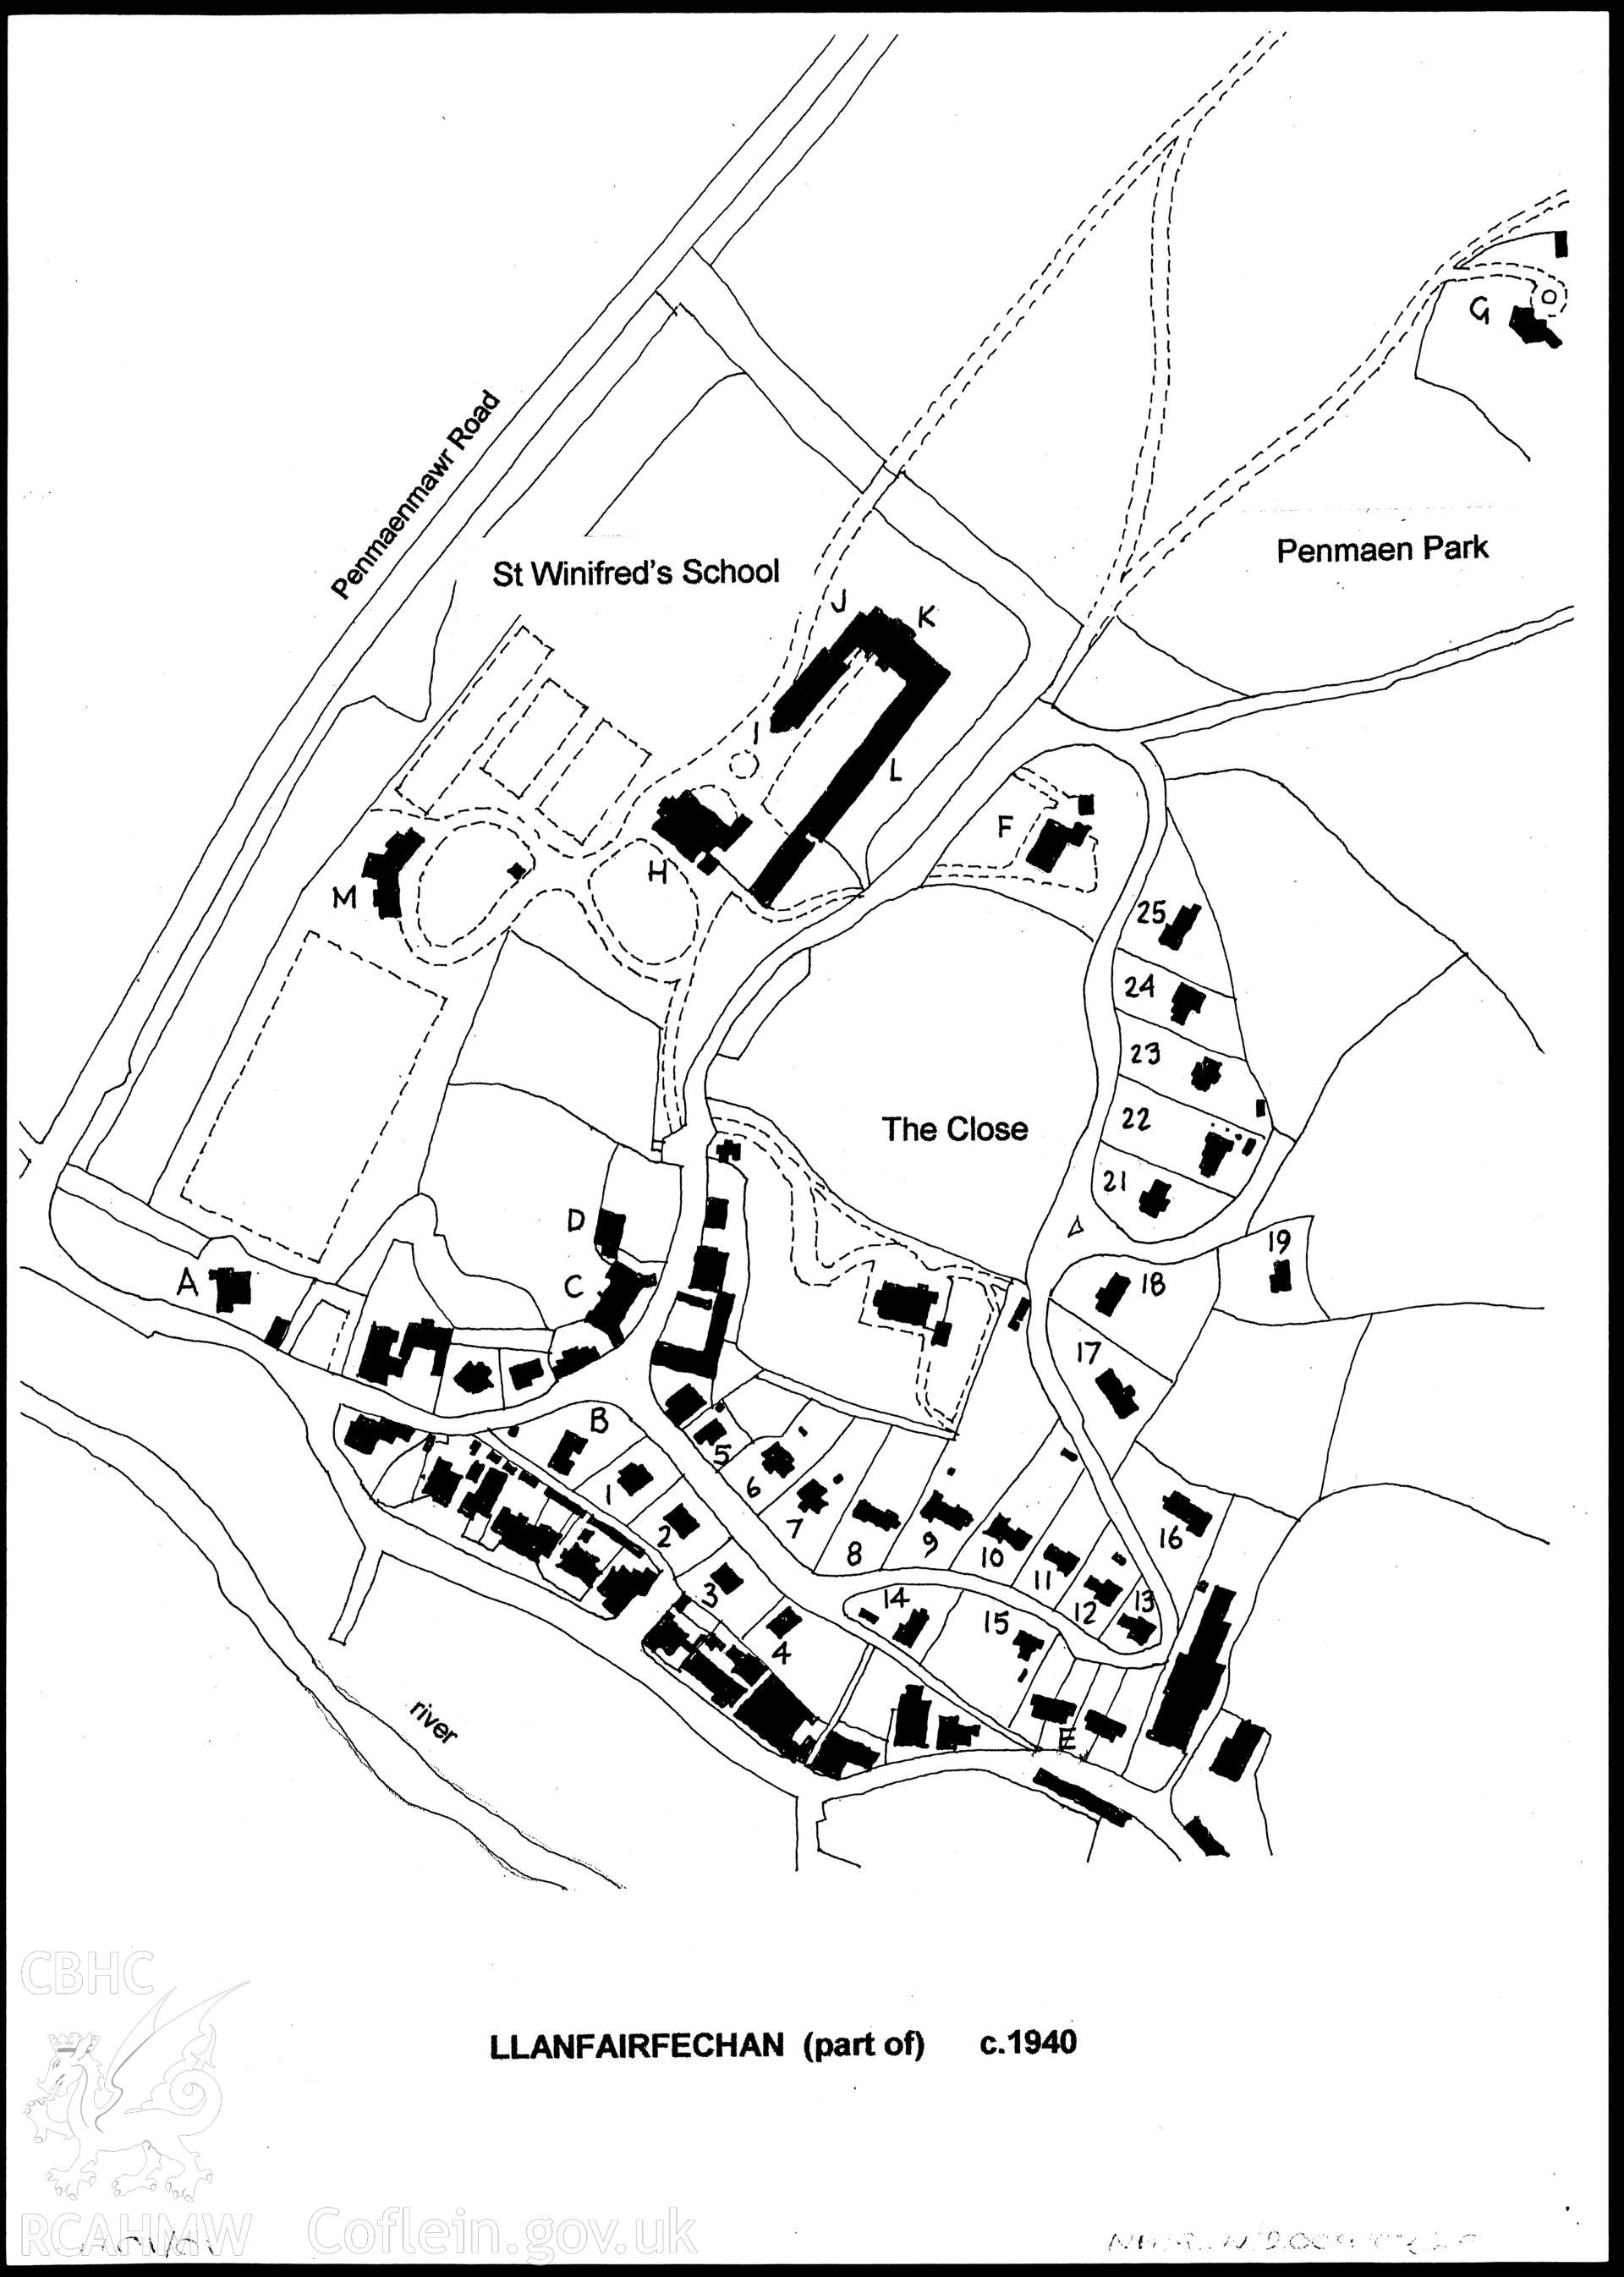 Annotated plan of the village of Llanfairfechan showing the houses built by H.L. North, produced by Adam Voelcker, 2009. 'Herbert Luck North. Arts and Crafts Architecture for Wales', page 52.